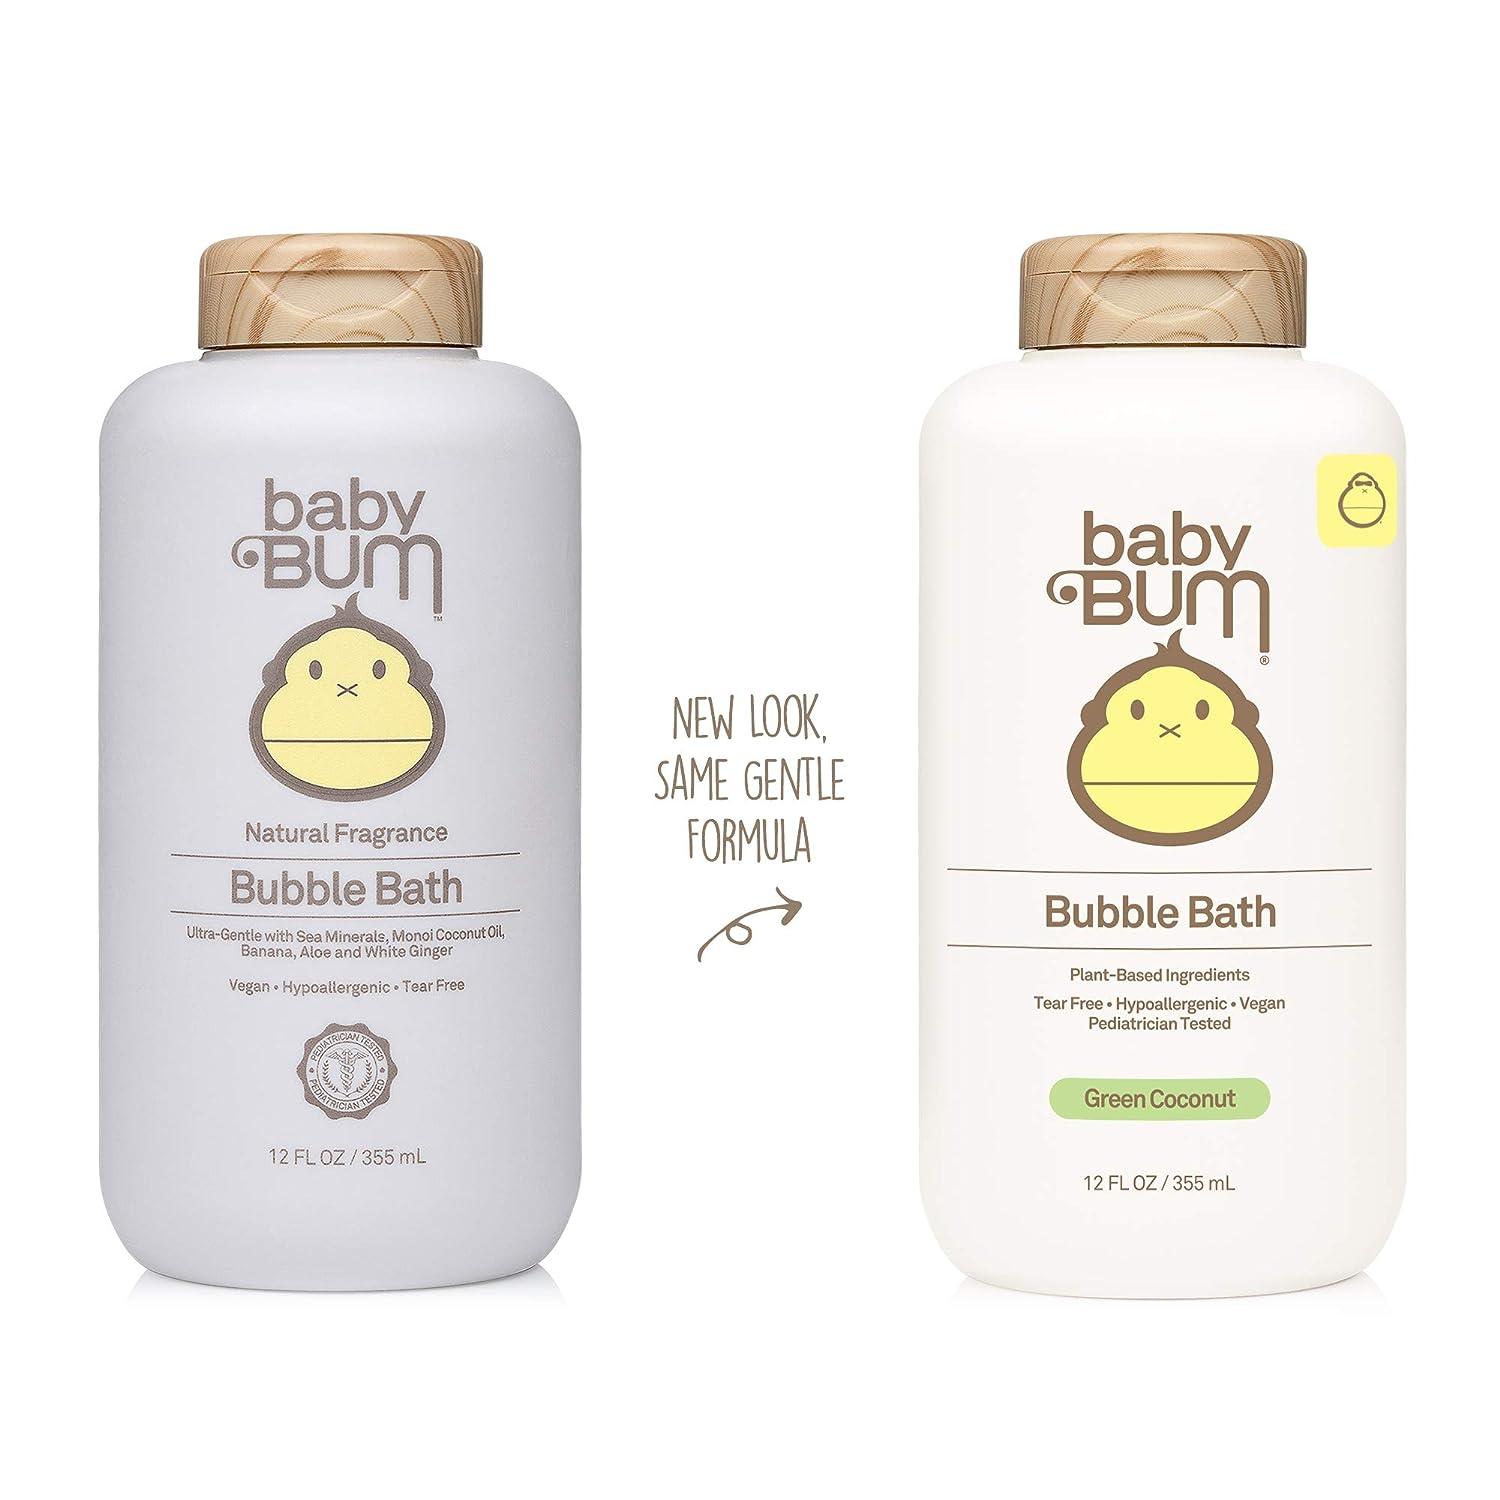 Baby Bum Bubble Bath, Tear Free Foaming Bubble Bath for Sensitive Skin  with White Ginger, Natural Fragrance, Gluten Free and Vegan, 12 FL OZ